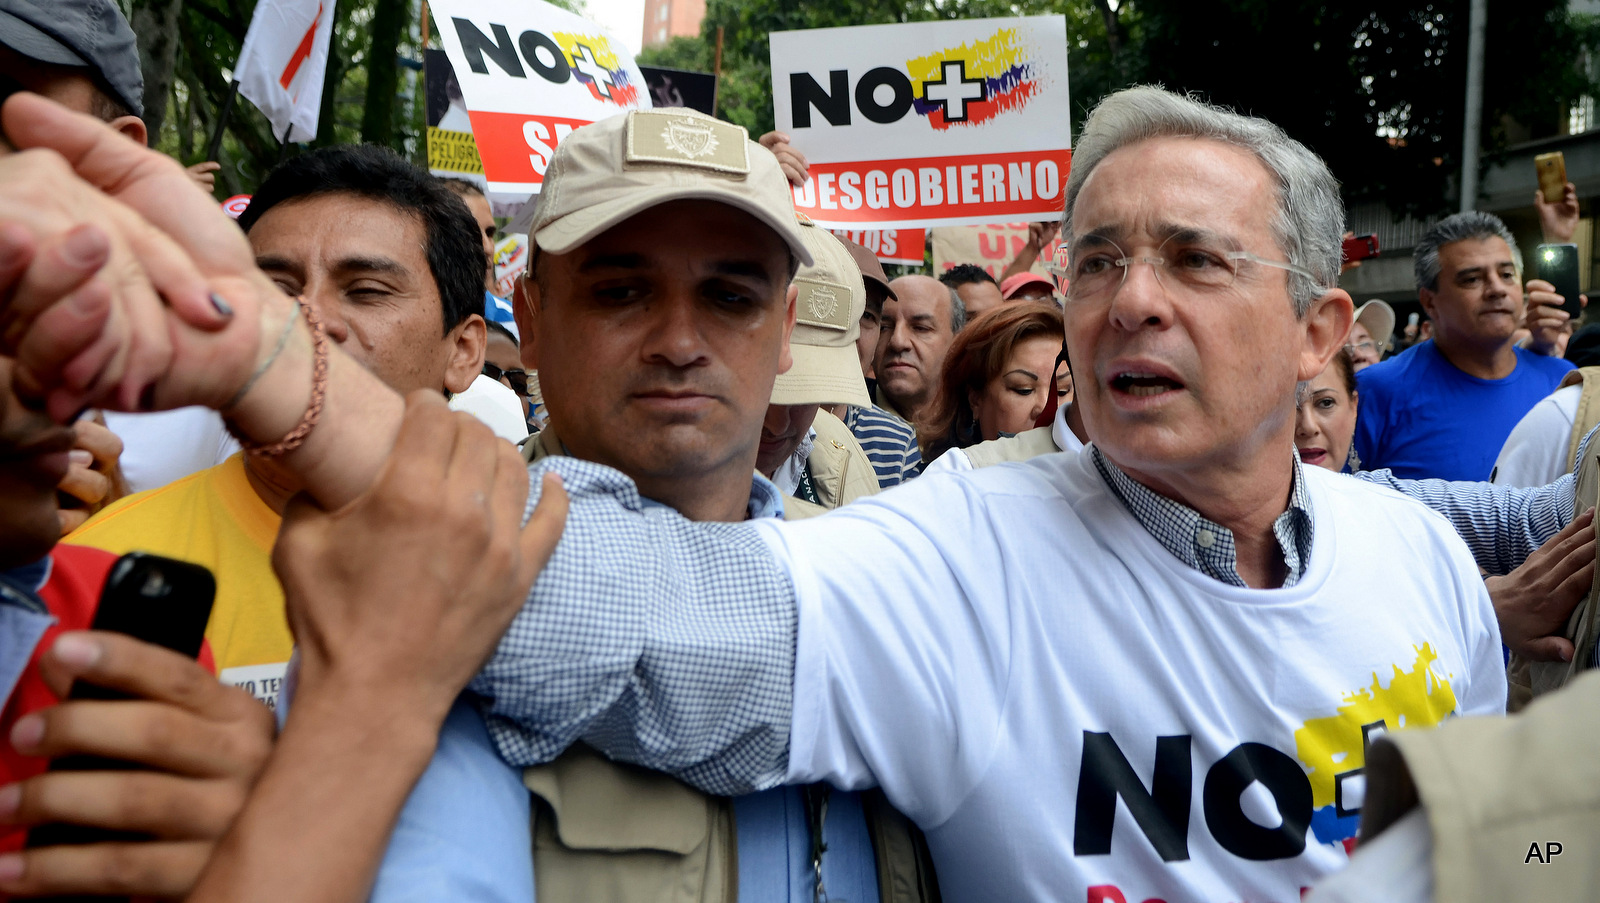 Opposition leader and former President Alvaro Uribe shakes hands with a supporter as he takes part in a protest against President Juan Manuel Santos' government and to denounce the concessions the government has made in peace talks with the Revolutionary Armed Forces of Colombia, or FARC, in Medellin, Colombia. 